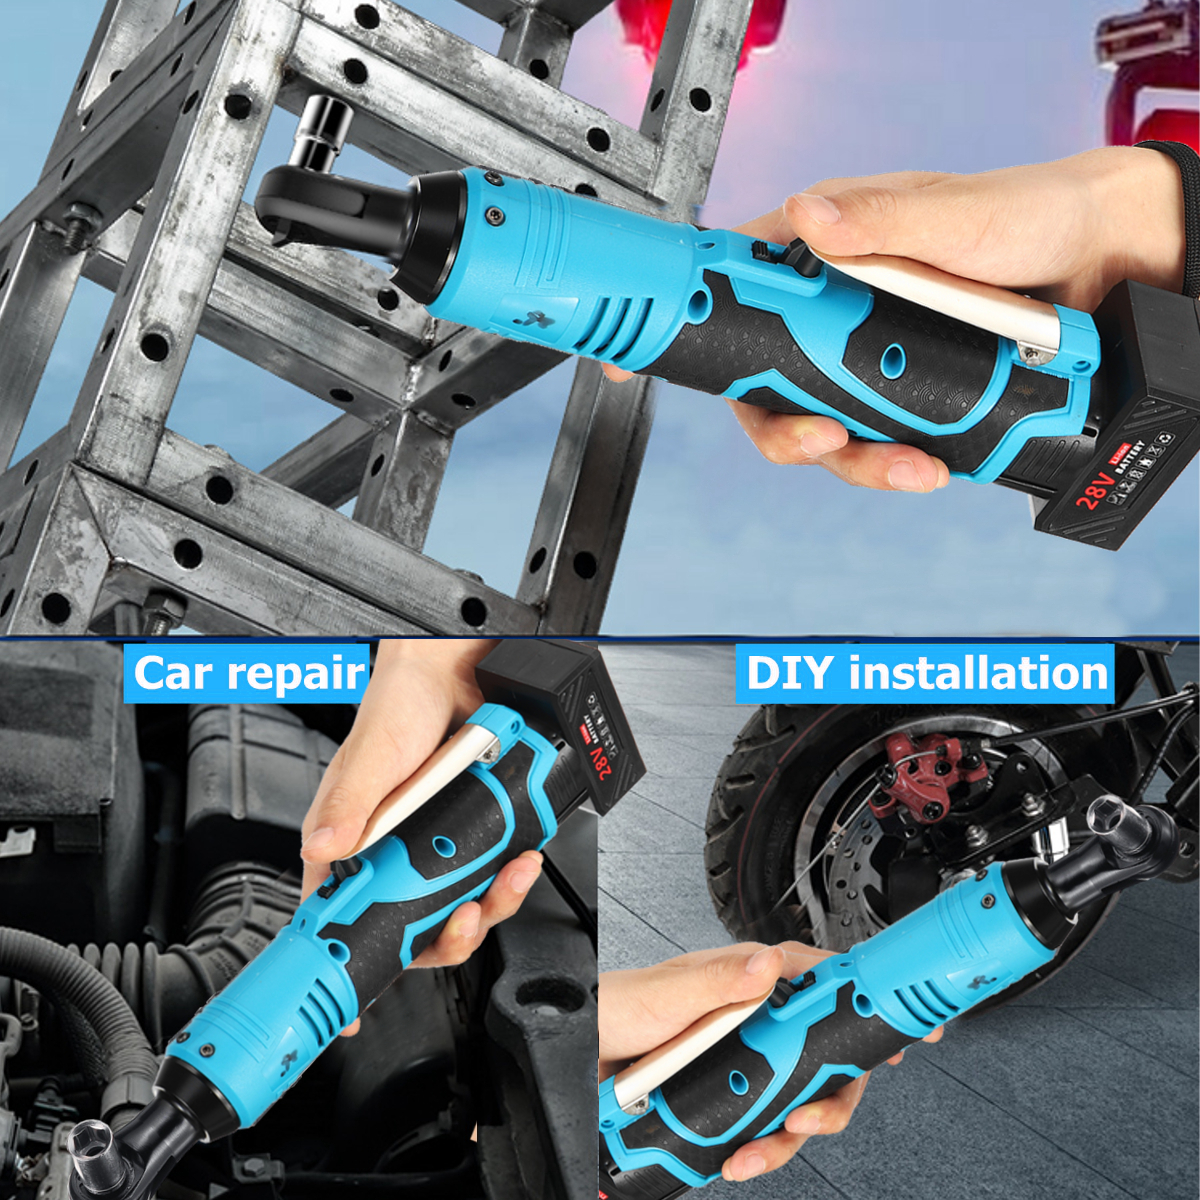 Portable-28V-Cordless-Rechargeable-Ratchet-Wrench-38-Inch-Electric-Right-Angle-Wrench-60Nm-W-2-Batte-1470794-10